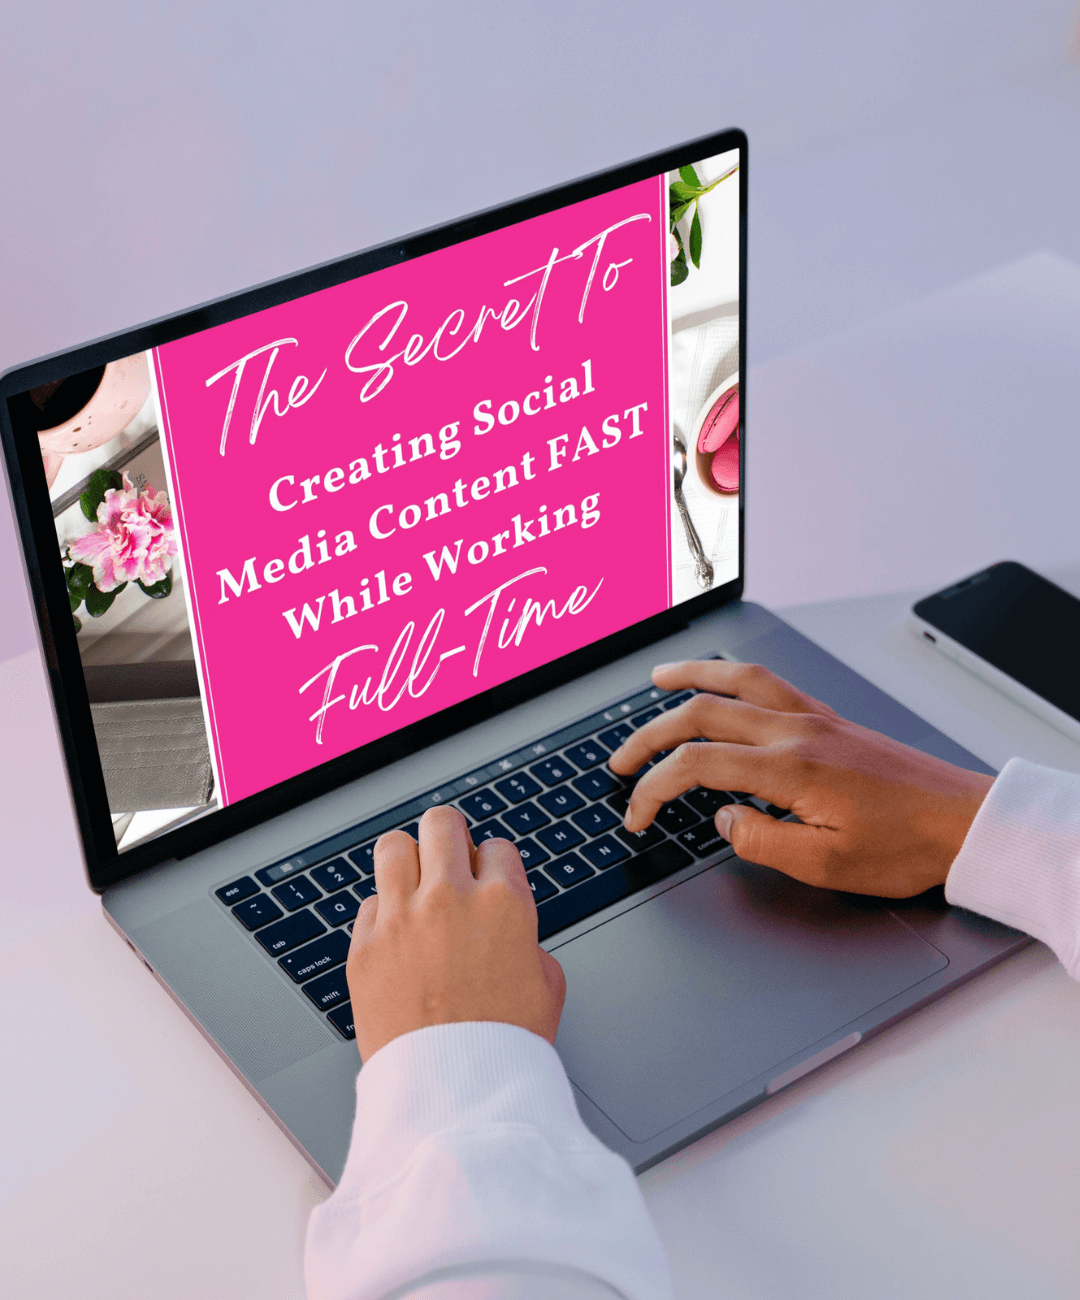 The Secret To Creating Social Media Content Fast While Working Full-Time